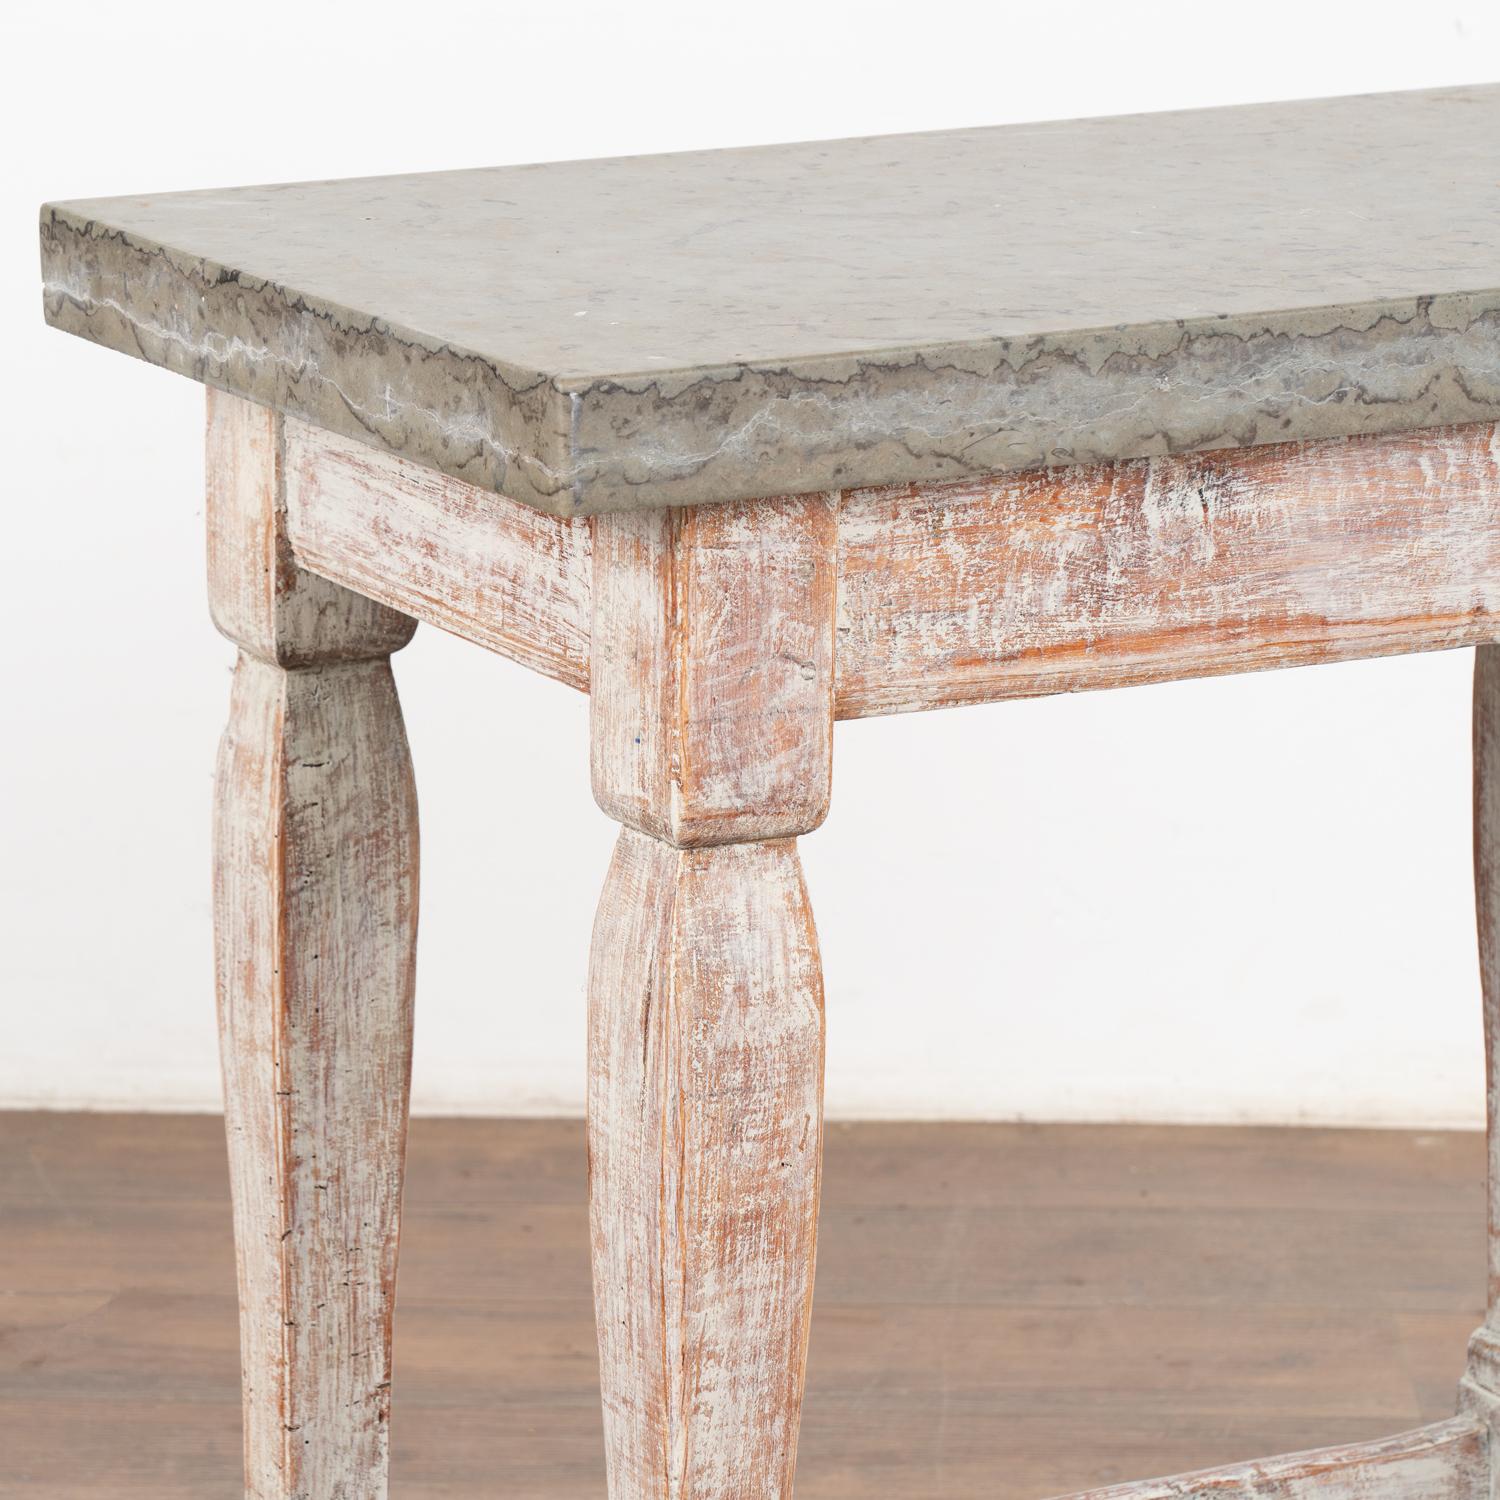 Stone Top Side Table Small Console Table, Sweden circa 1800-40 In Good Condition For Sale In Round Top, TX